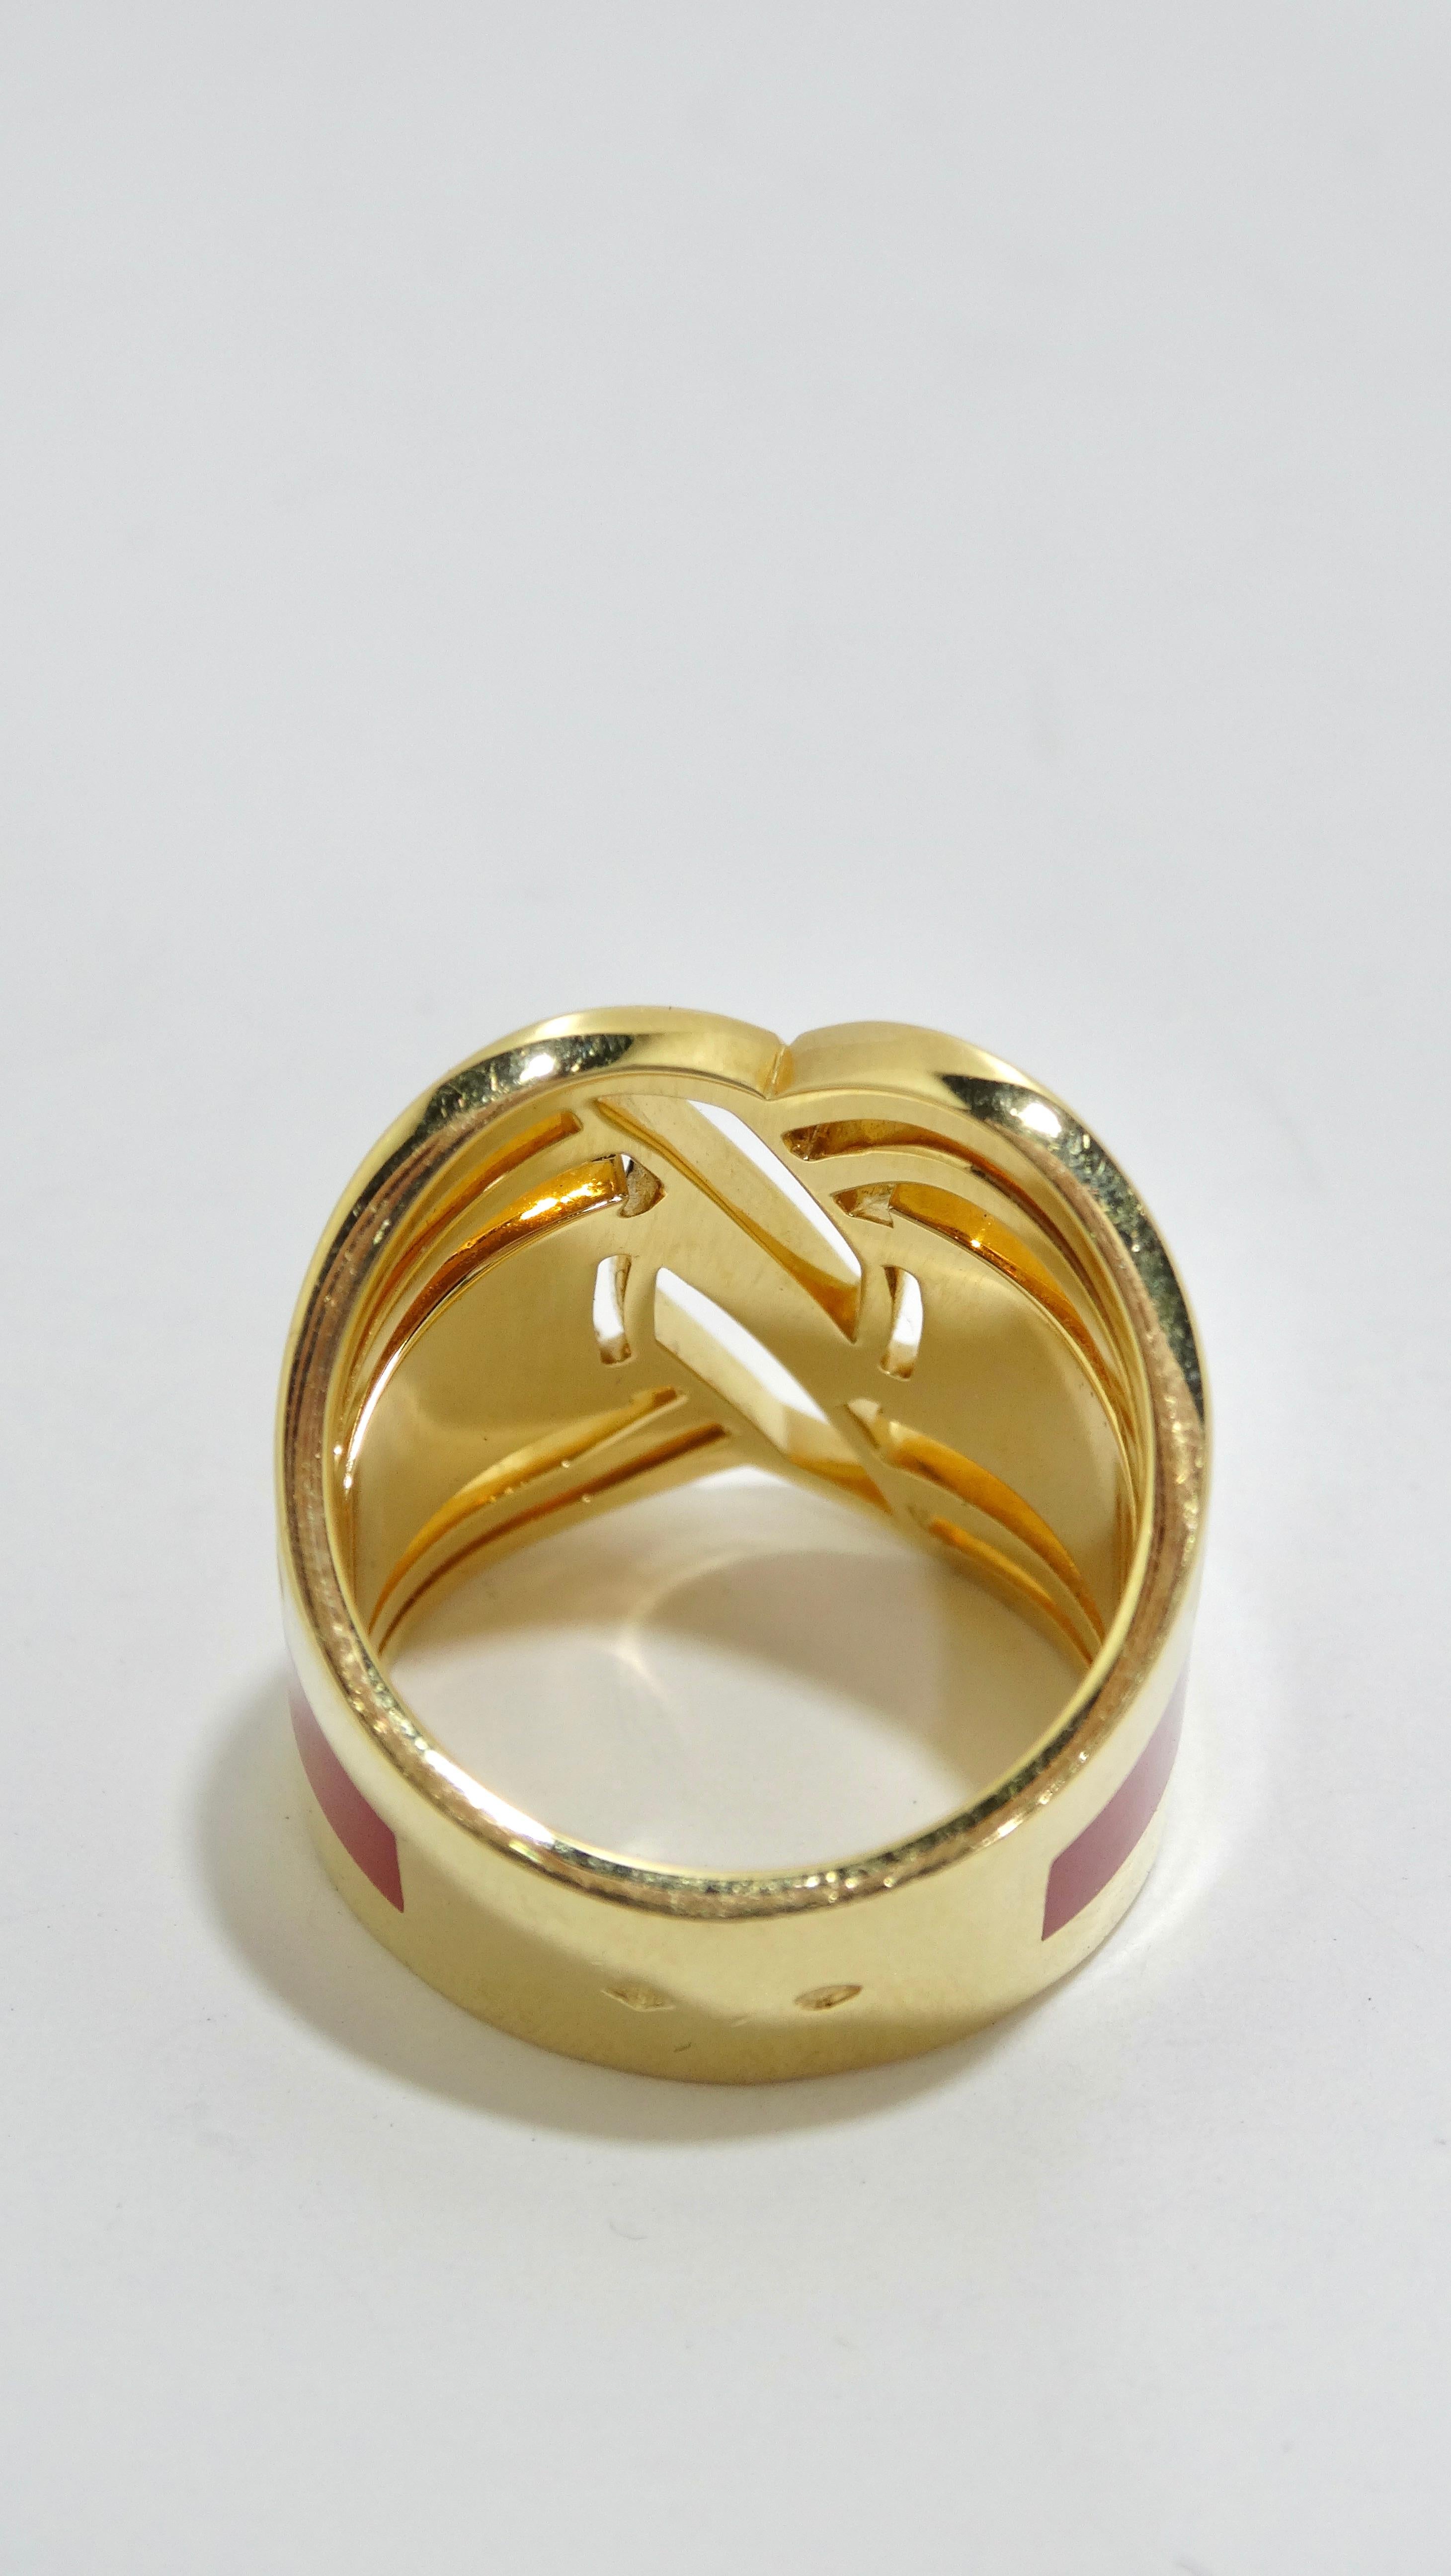 Chanel Gallery Collection HyCeram 18k Gold Ring In Excellent Condition For Sale In Scottsdale, AZ